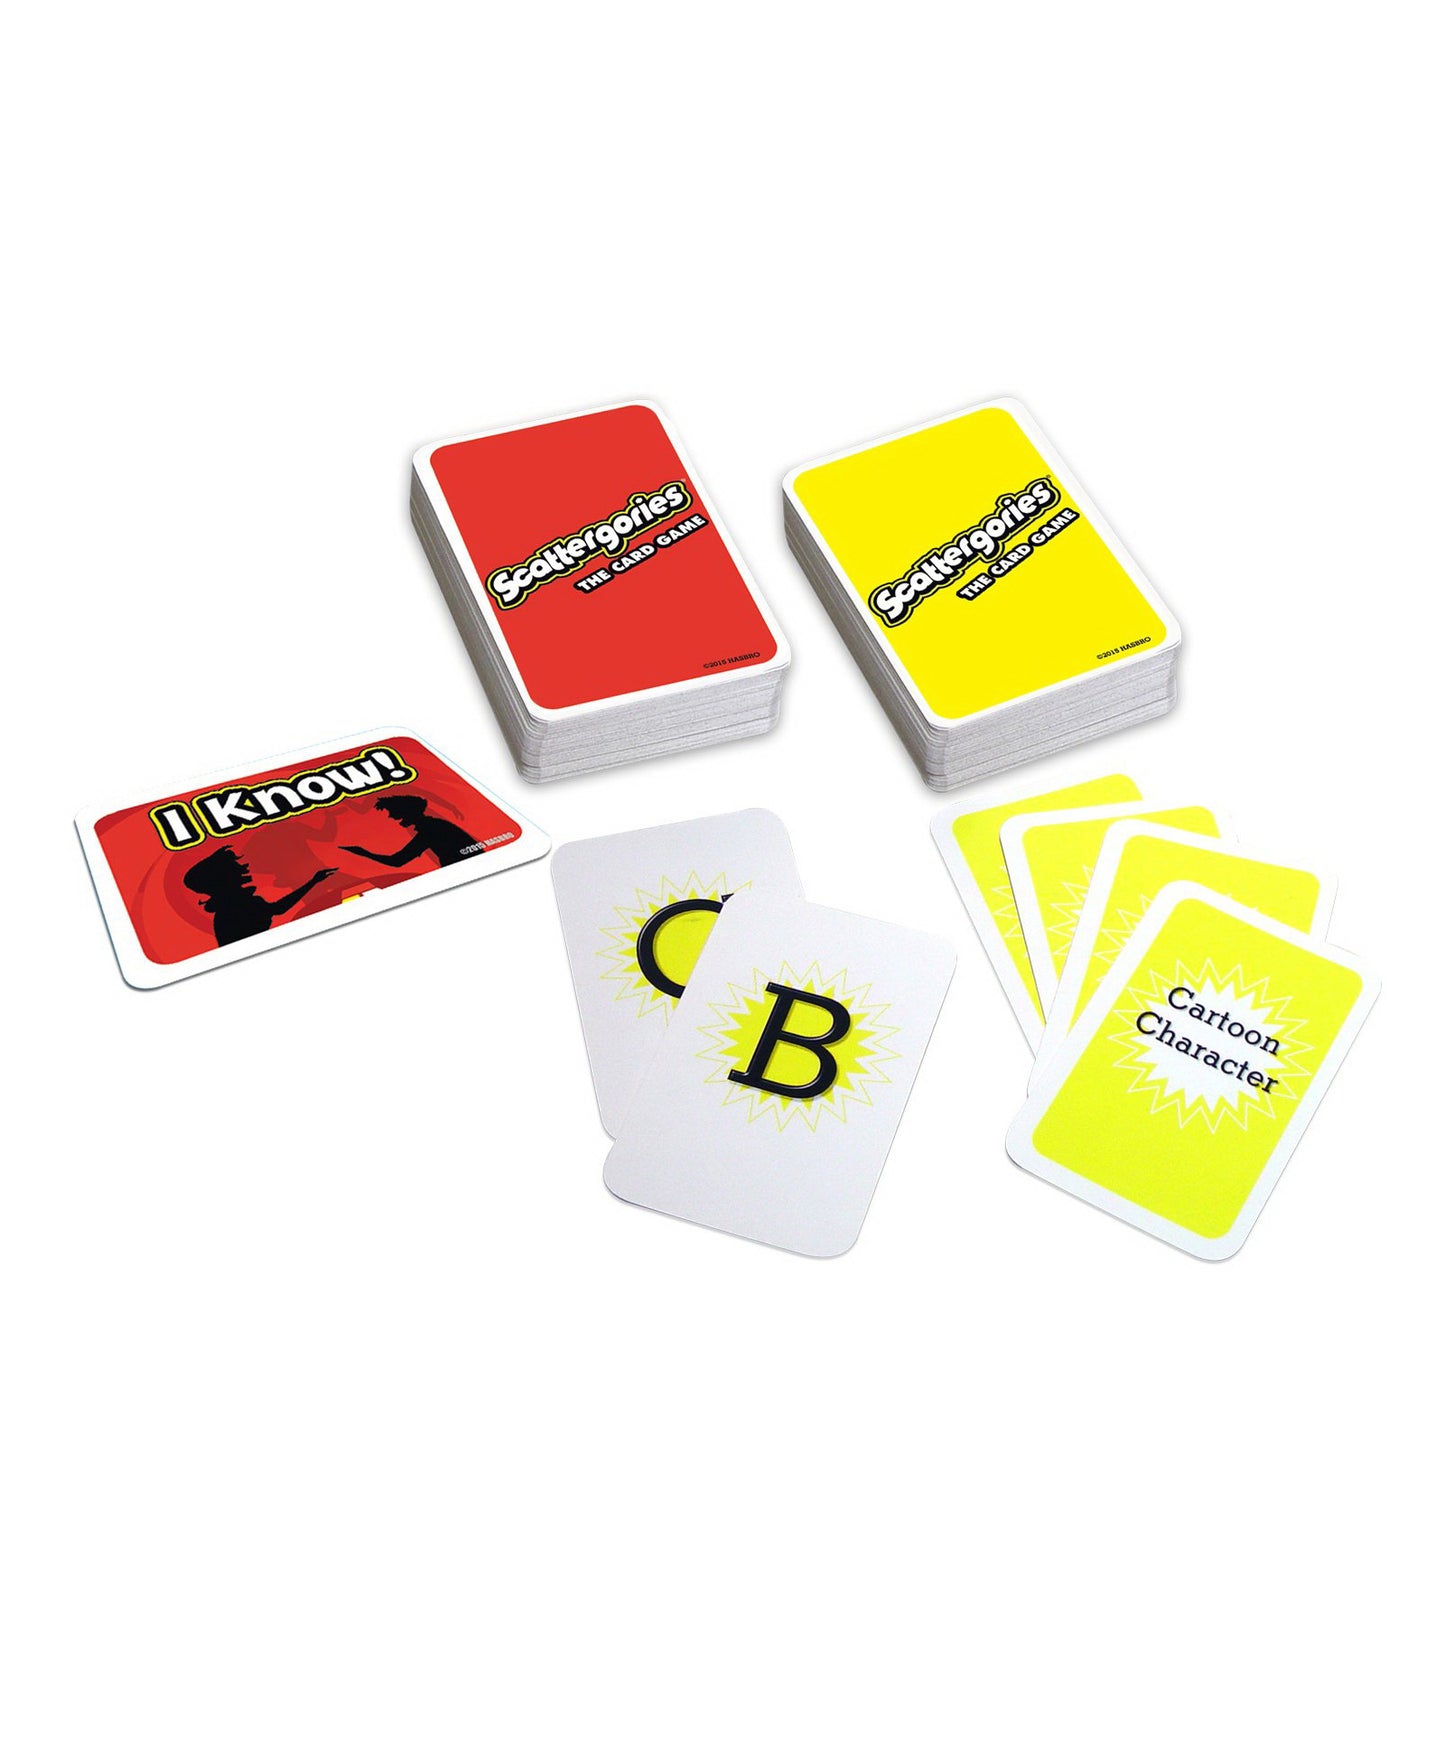 Scattergories Card Game for 2 or More Players Ages 8 and Up